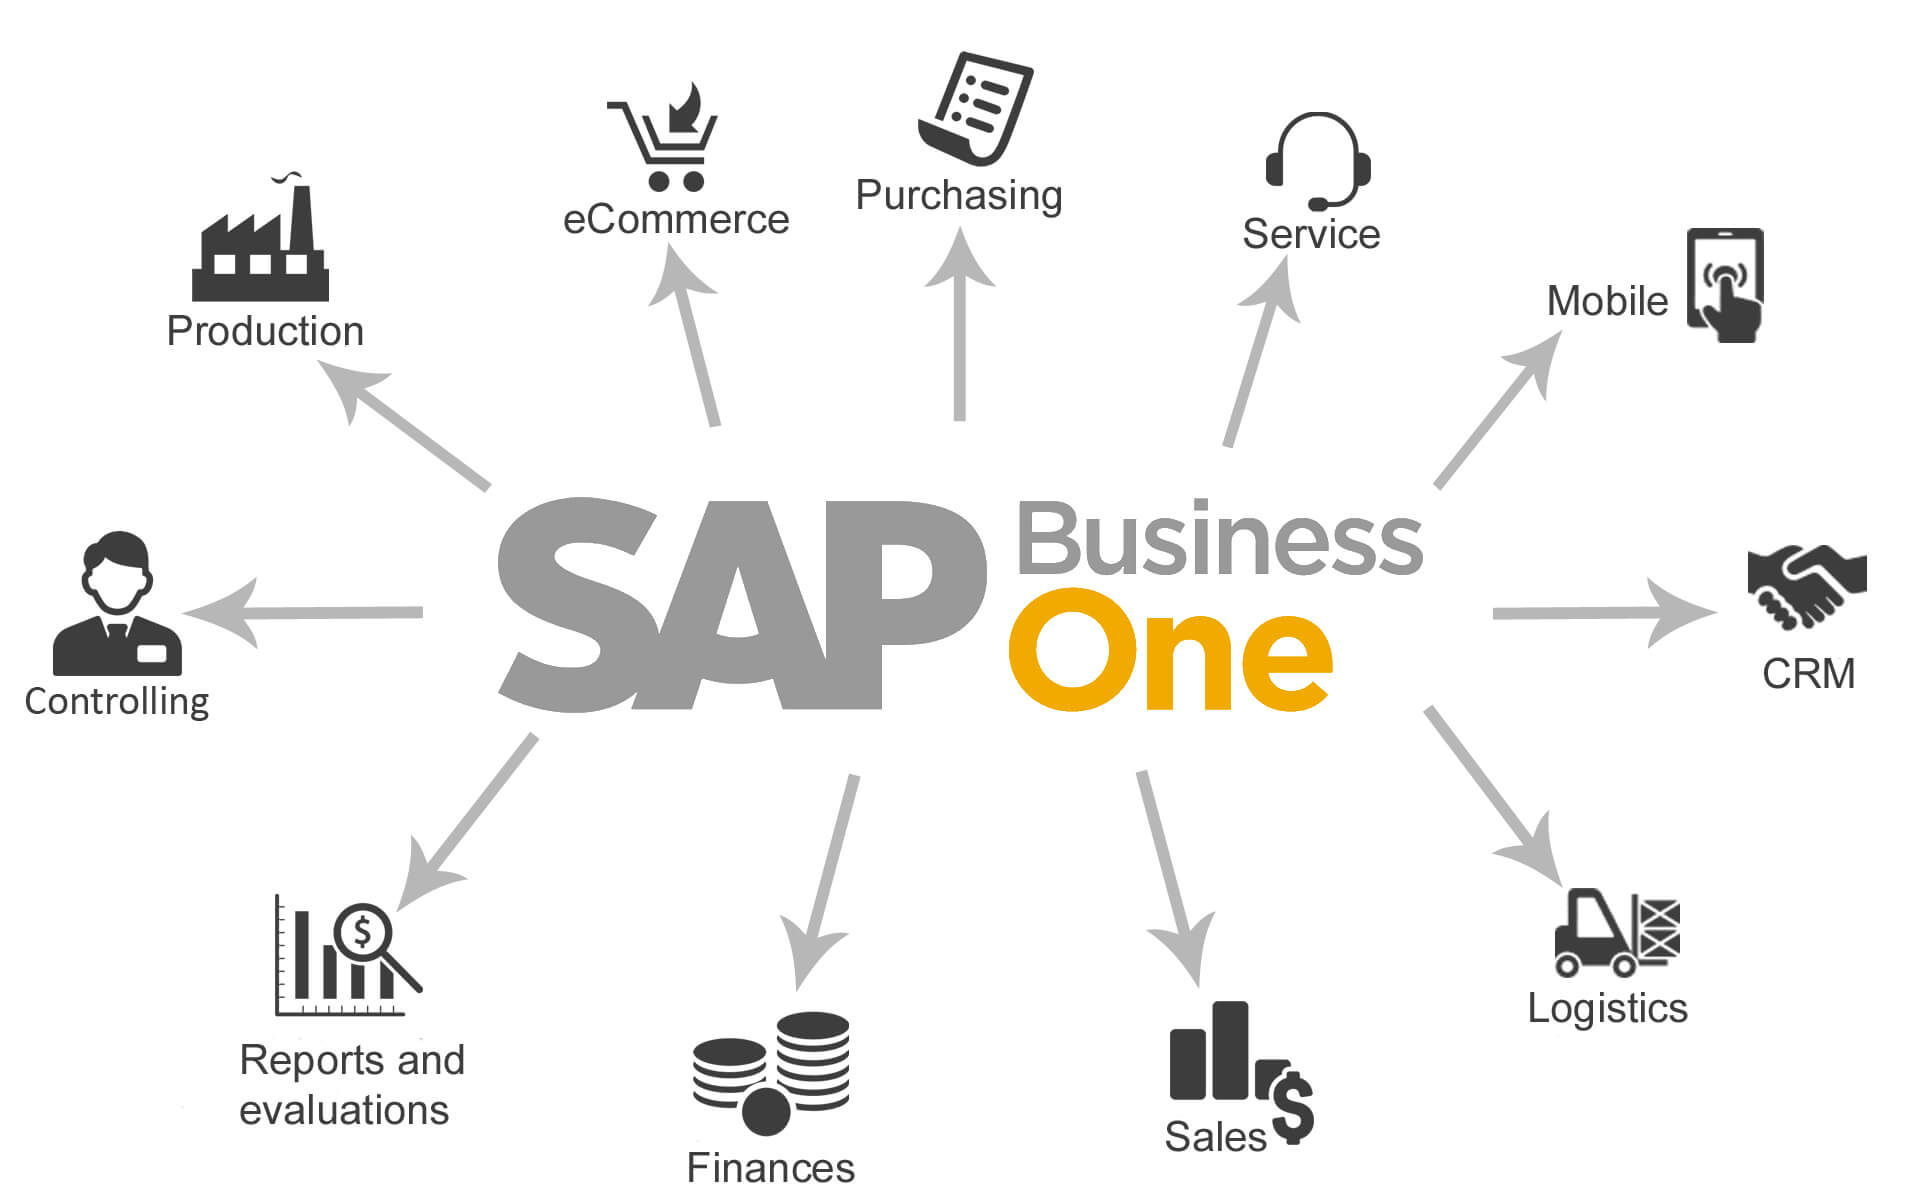 sap business one implementation